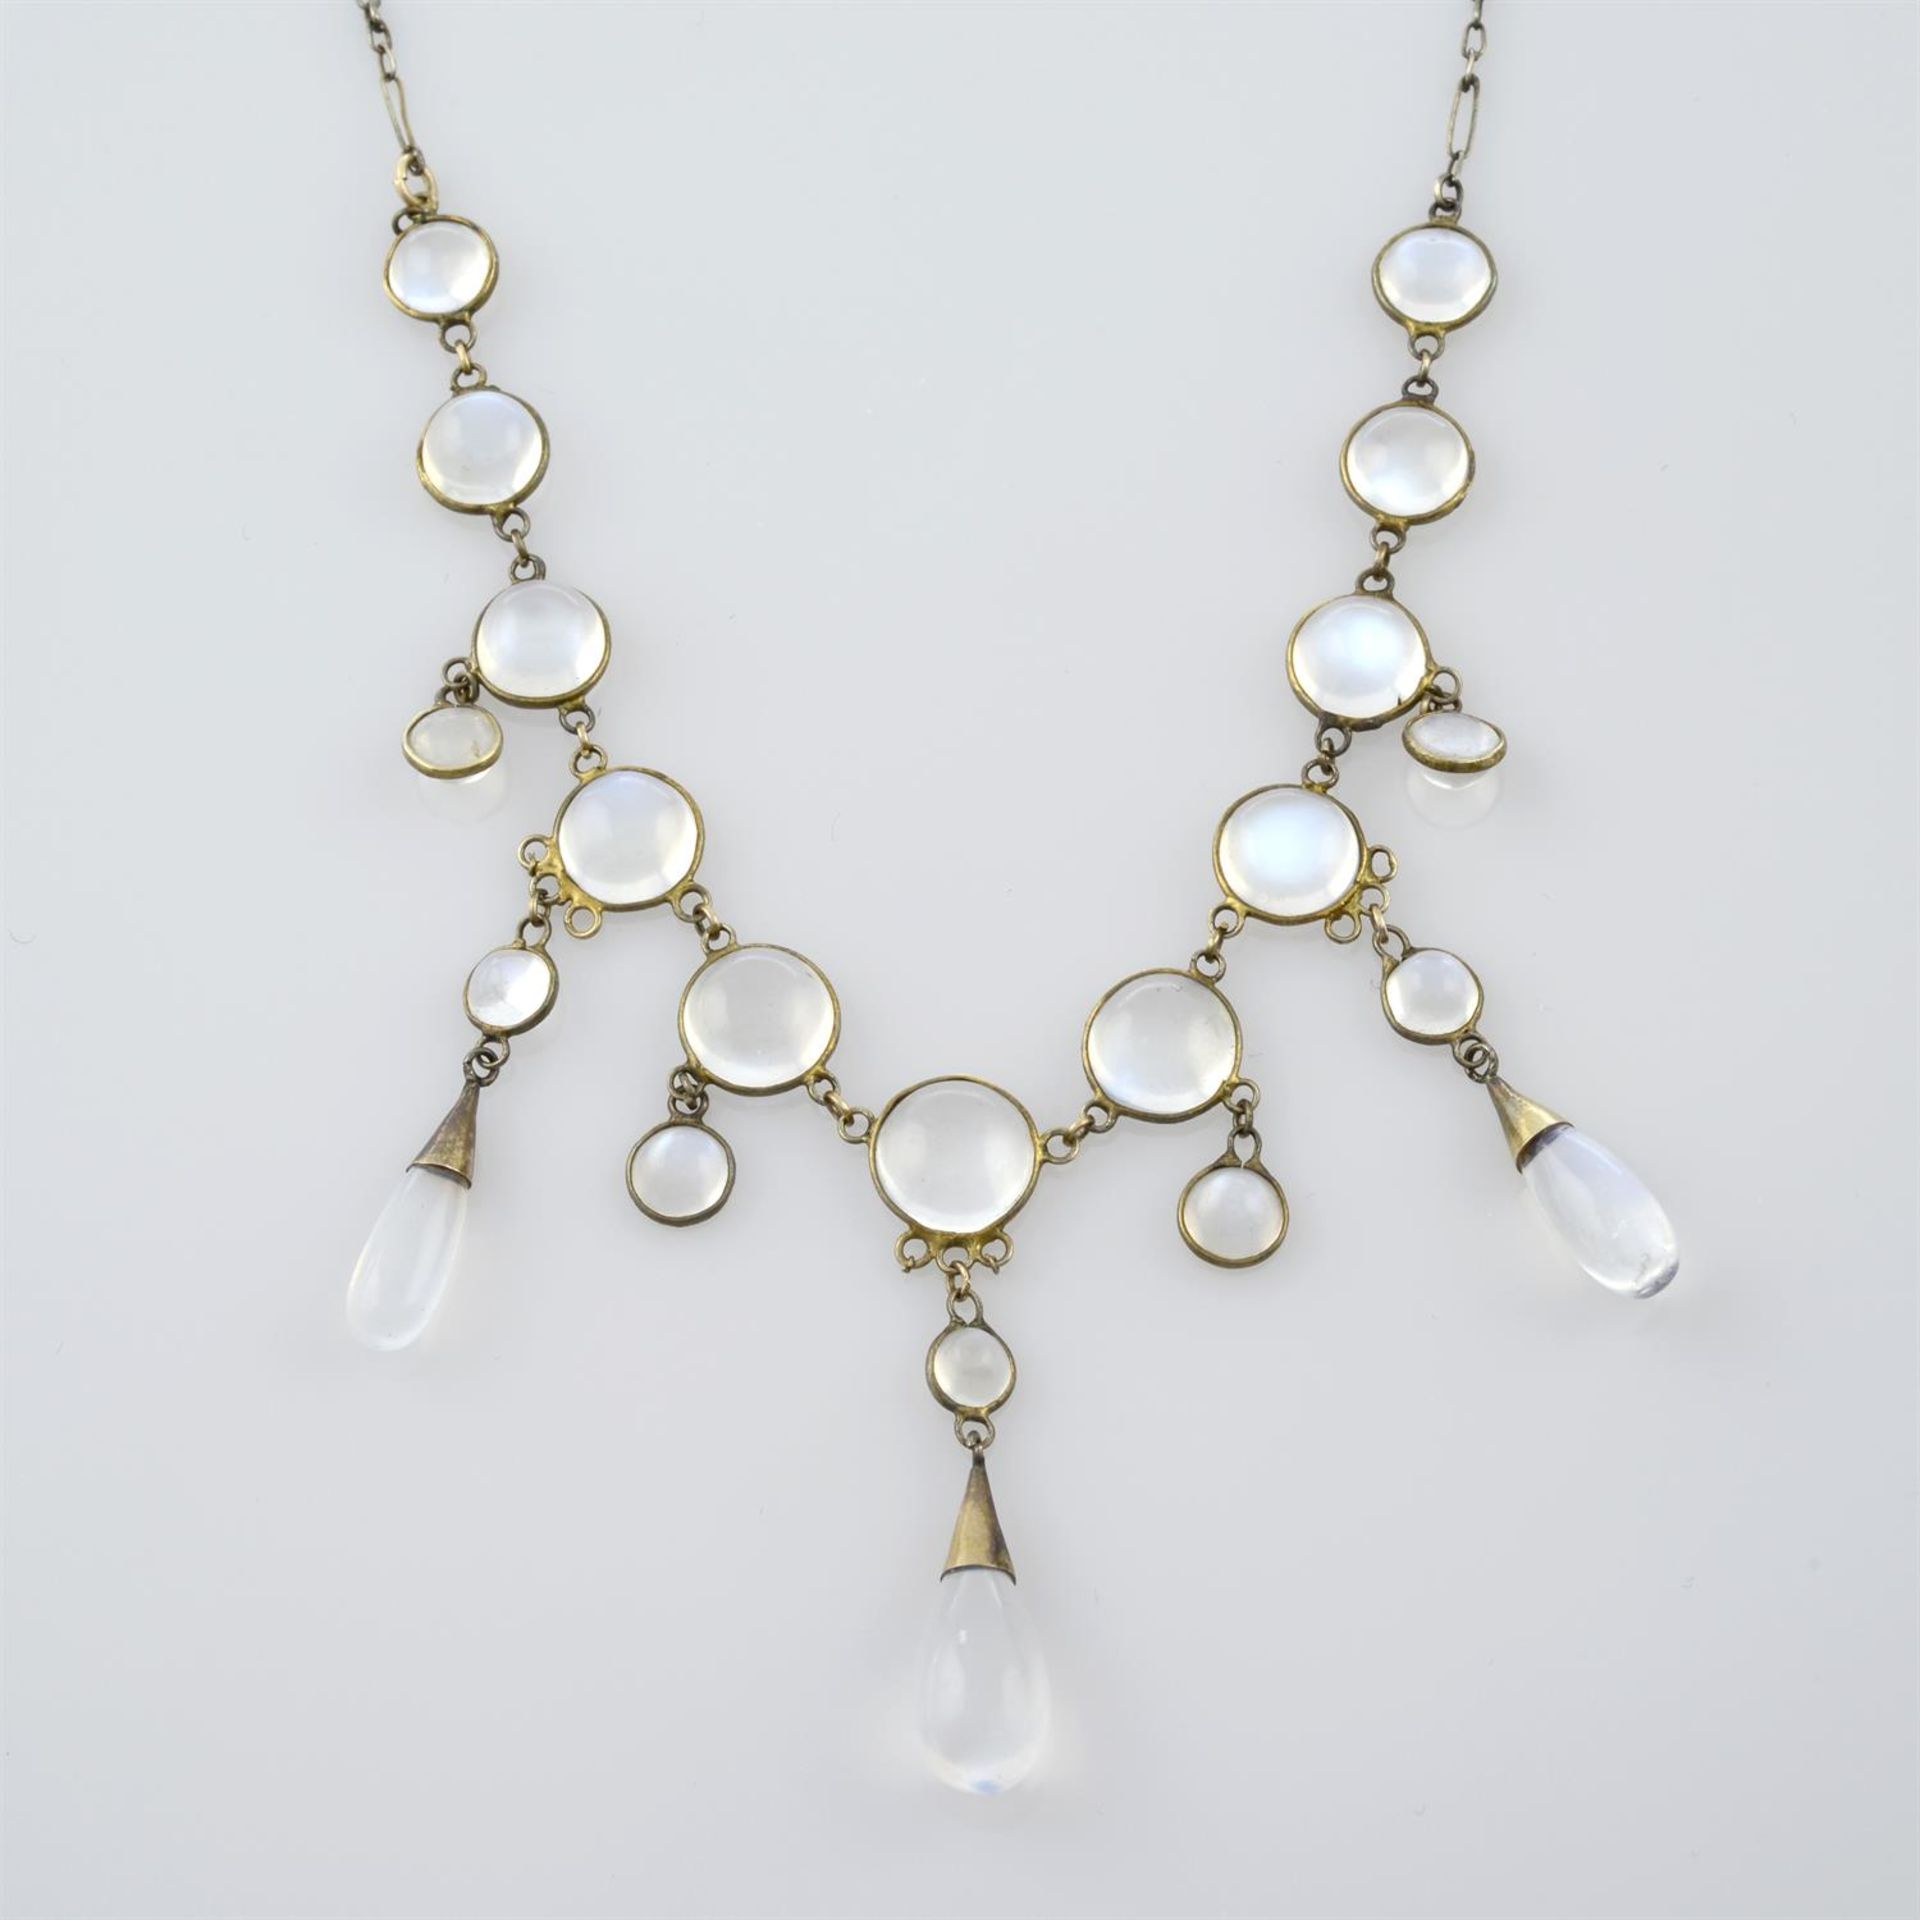 An early 20th century moonstone fringe necklace.